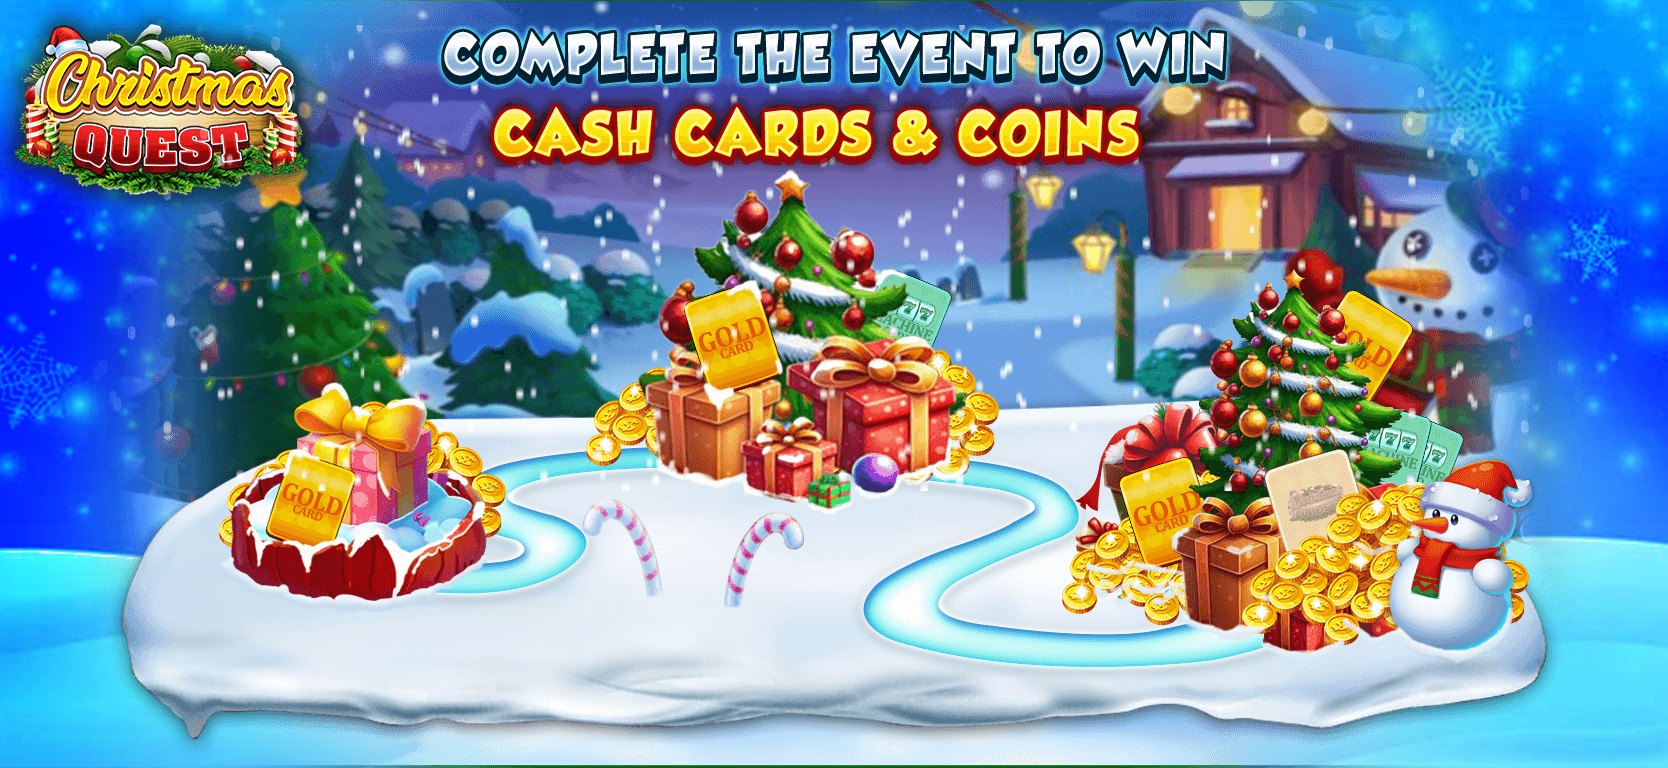 Complete the event